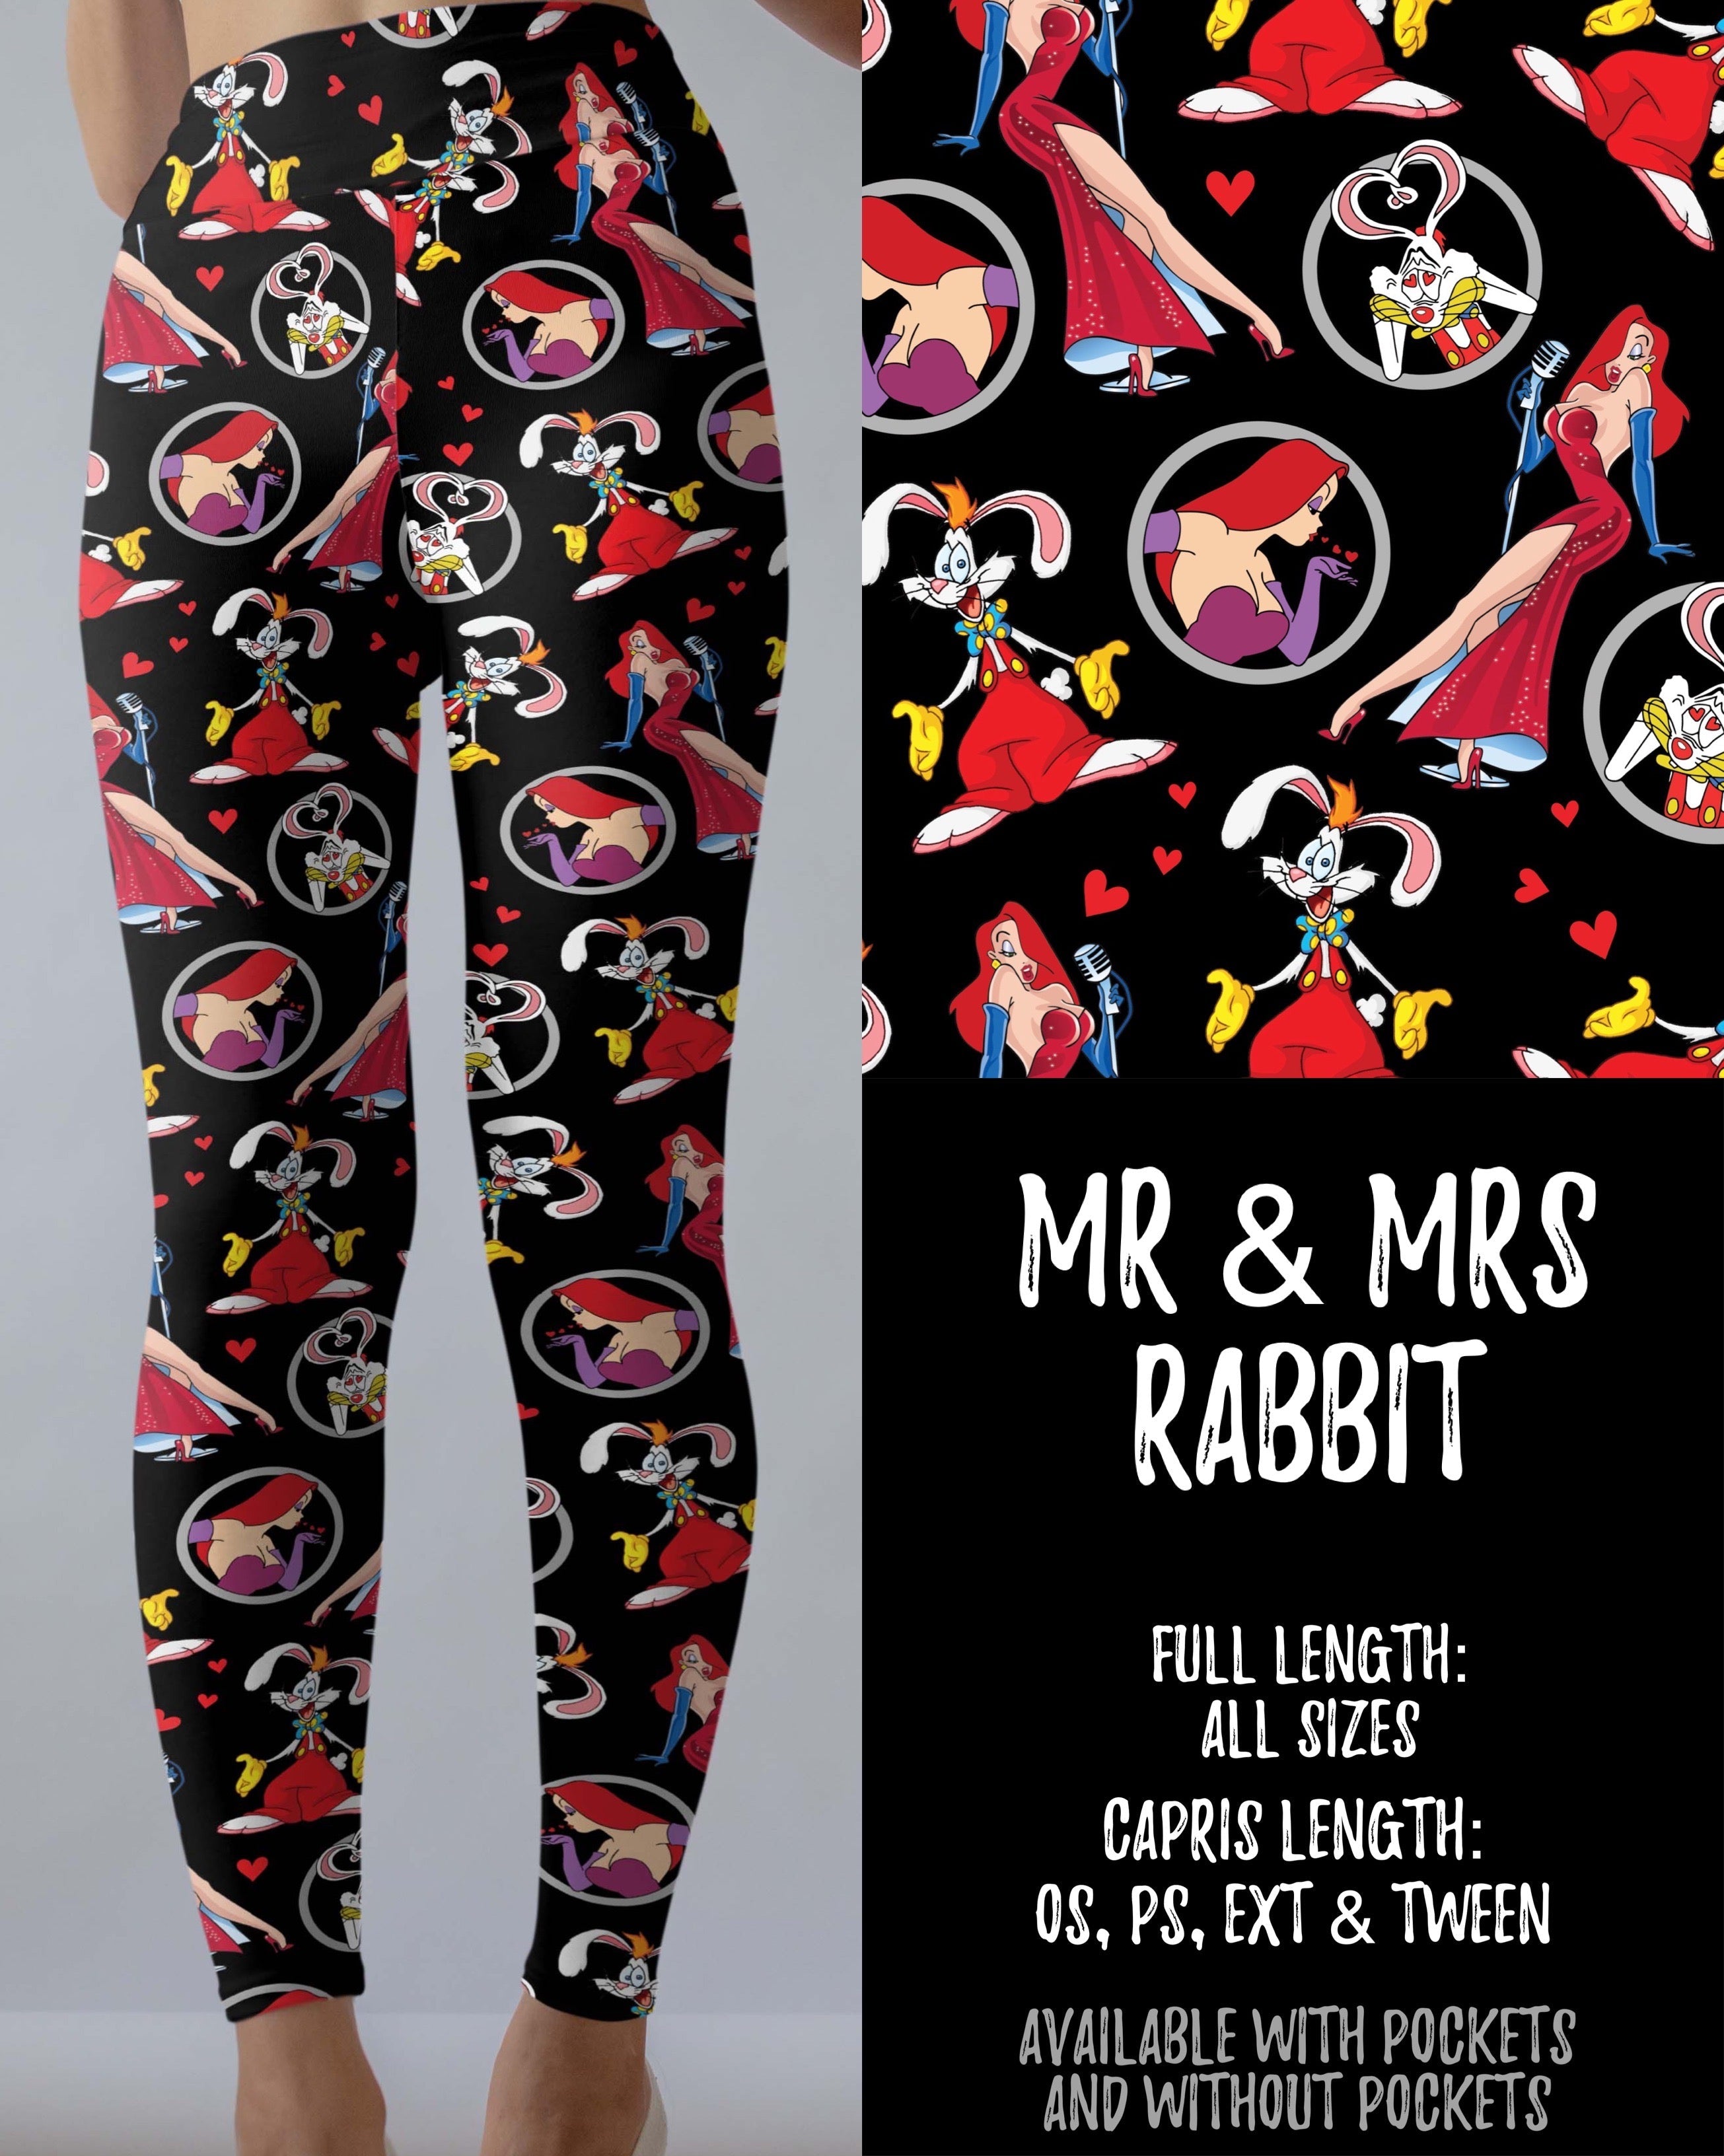 Mr and Mrs Rabbit Capri Leggings with and without Pockets